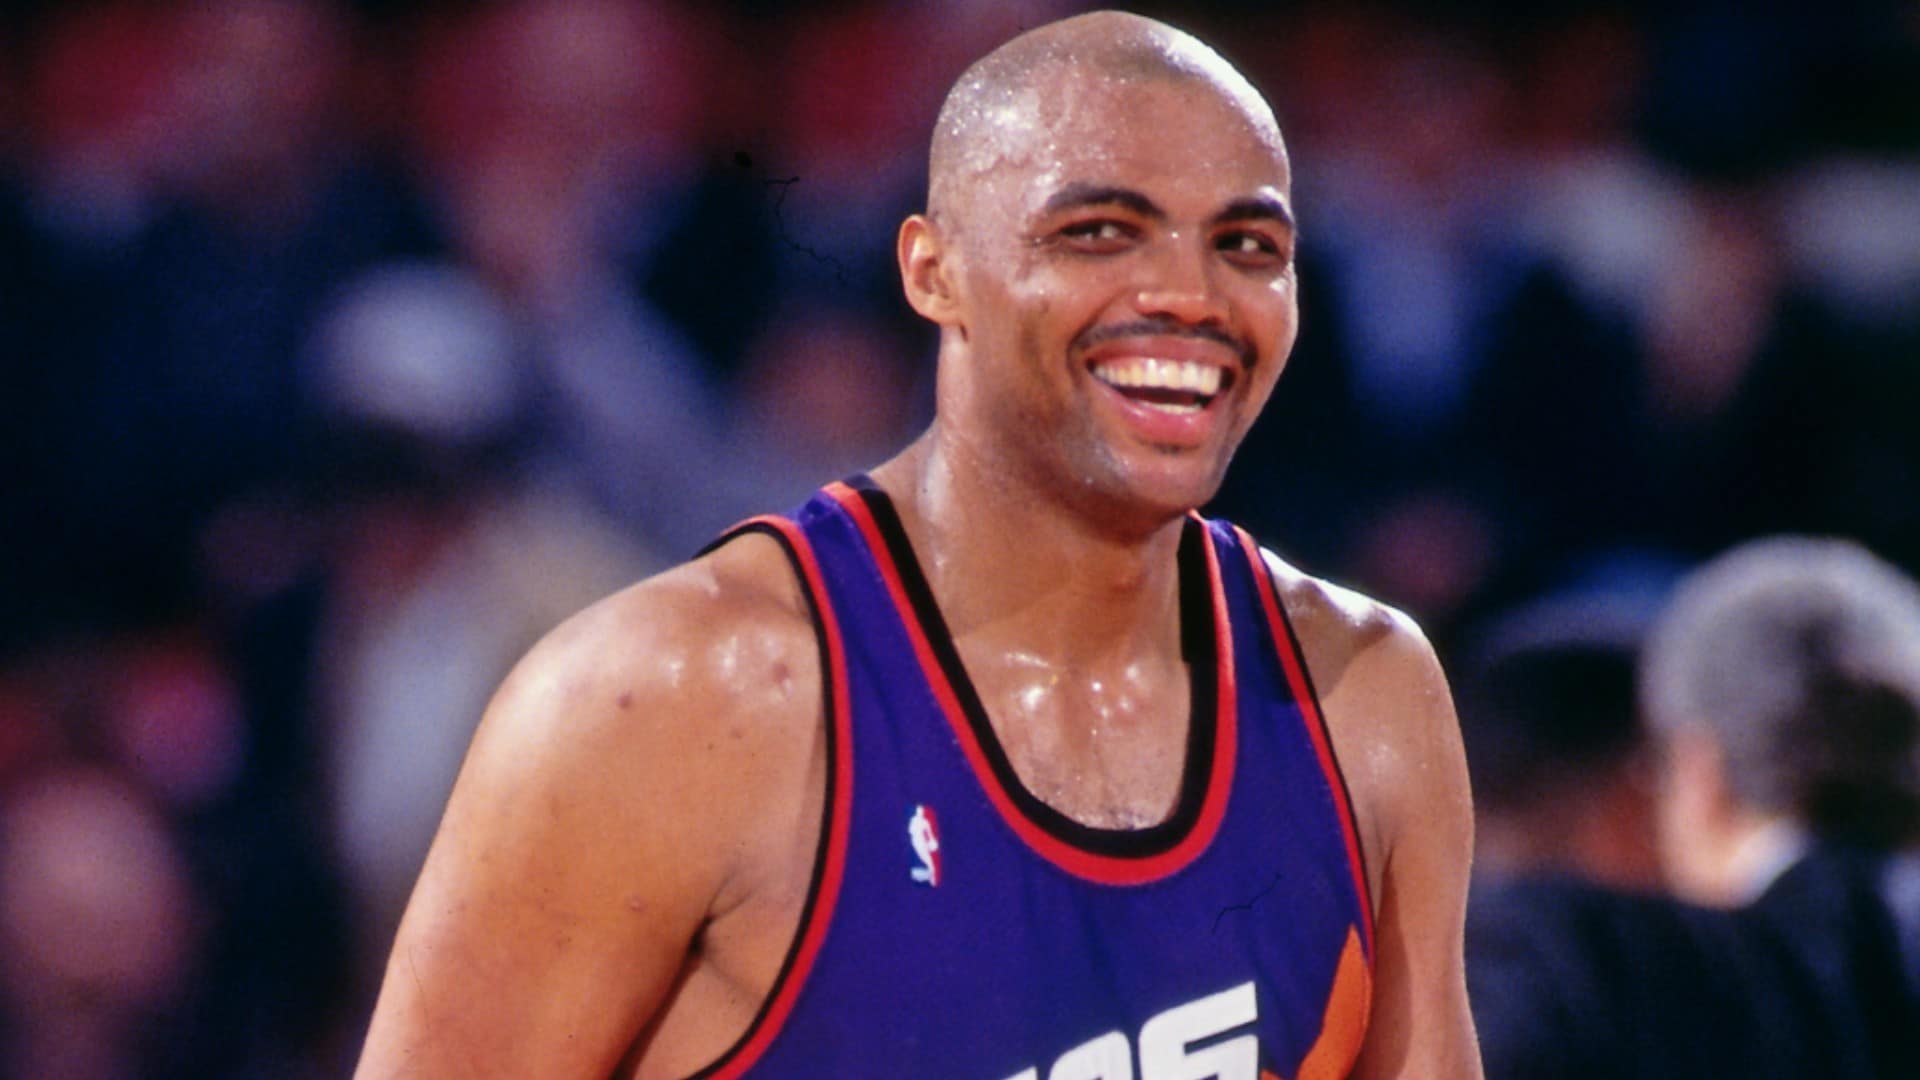 After the Denver Nuggets’ Loss, Charles Barkley Summed Up Anthony Edwards With Just Two Words